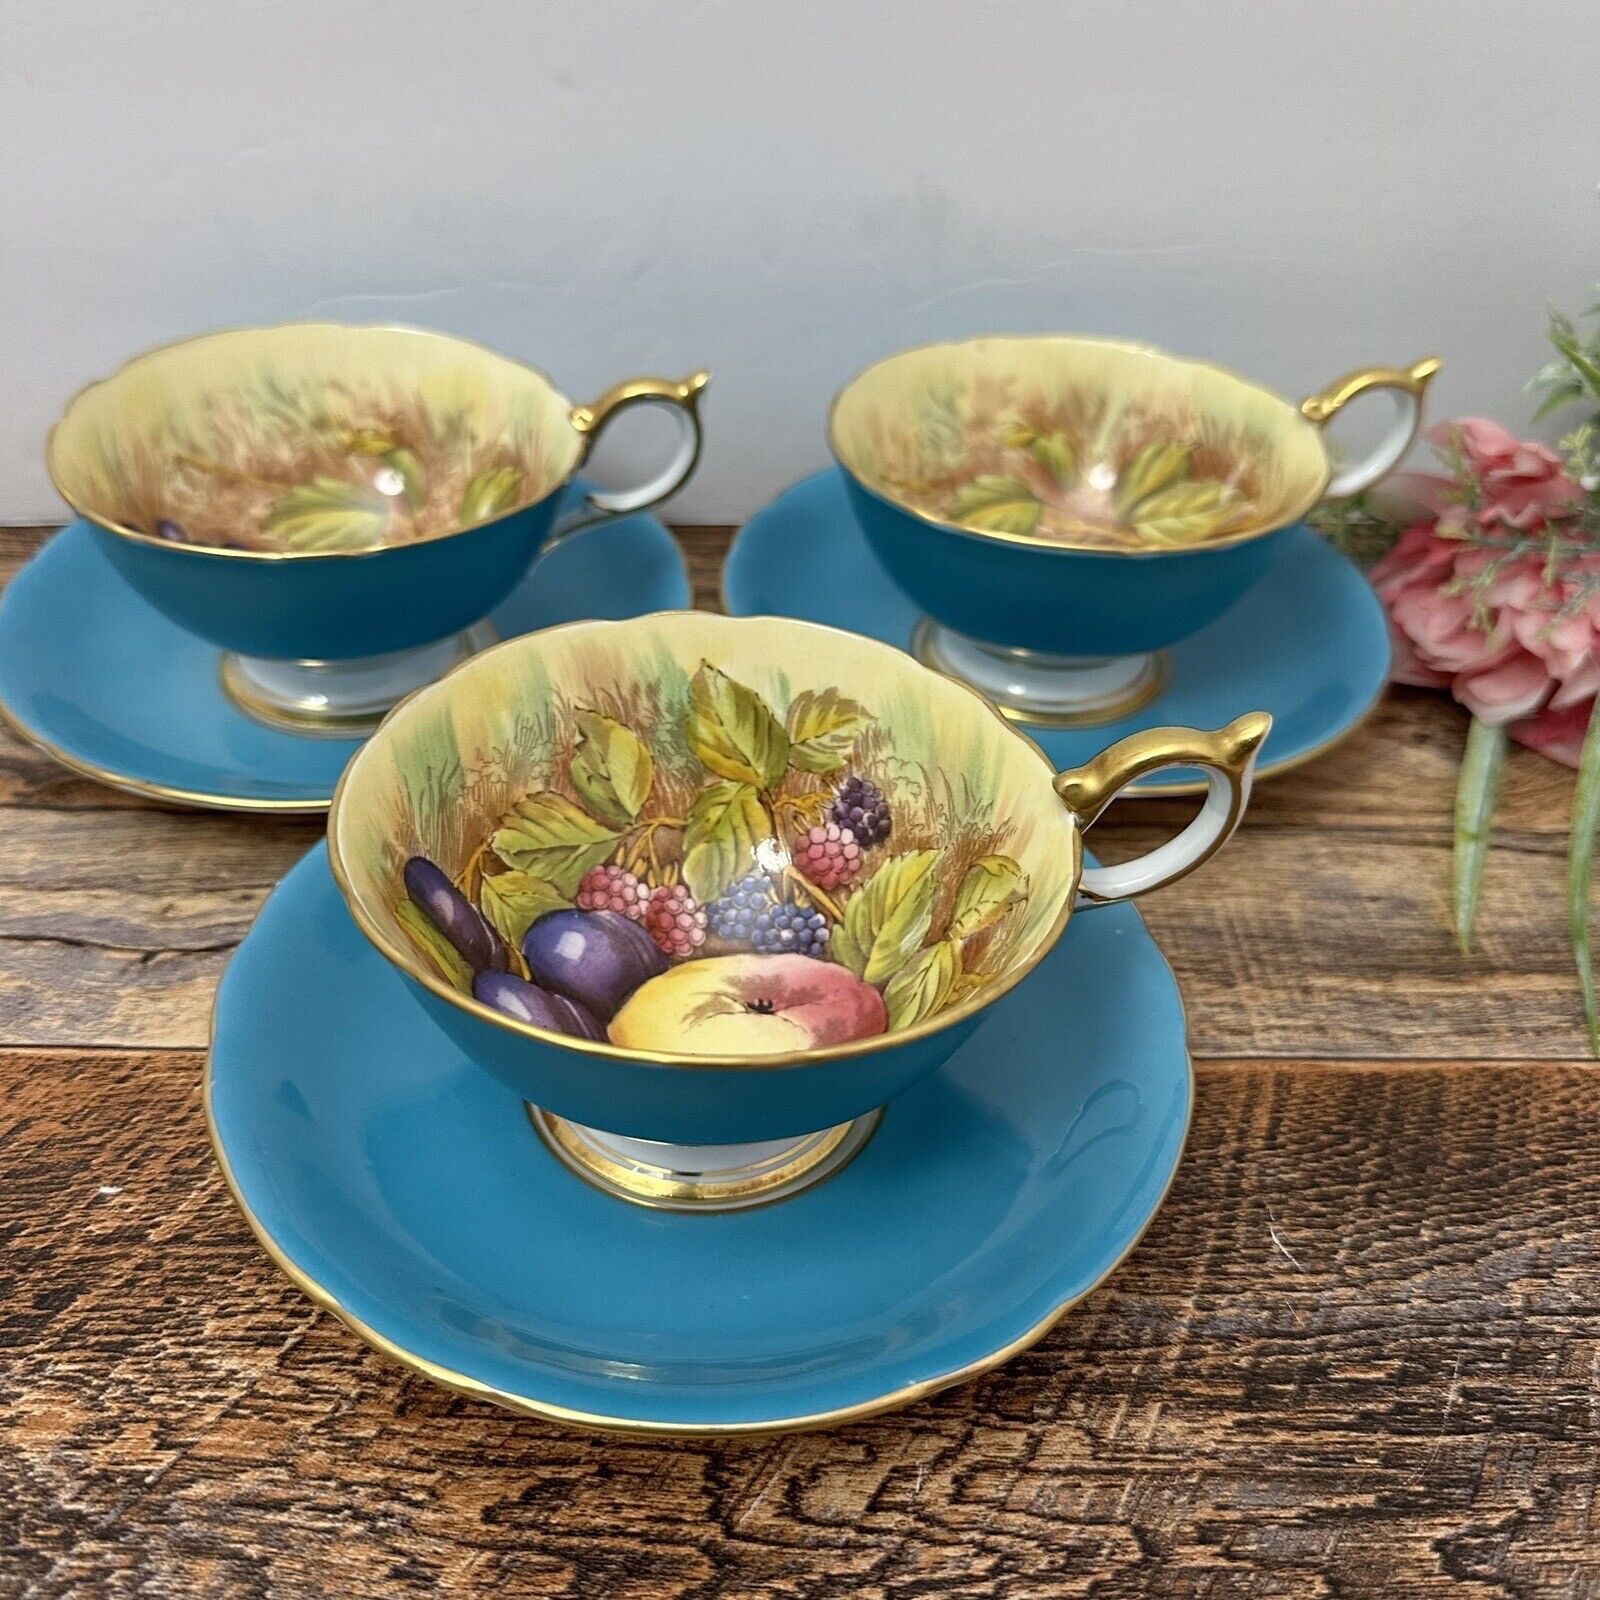 Aynsley England - 3 Cup and Saucer Gold Border Fruit Turquoise Tea Set